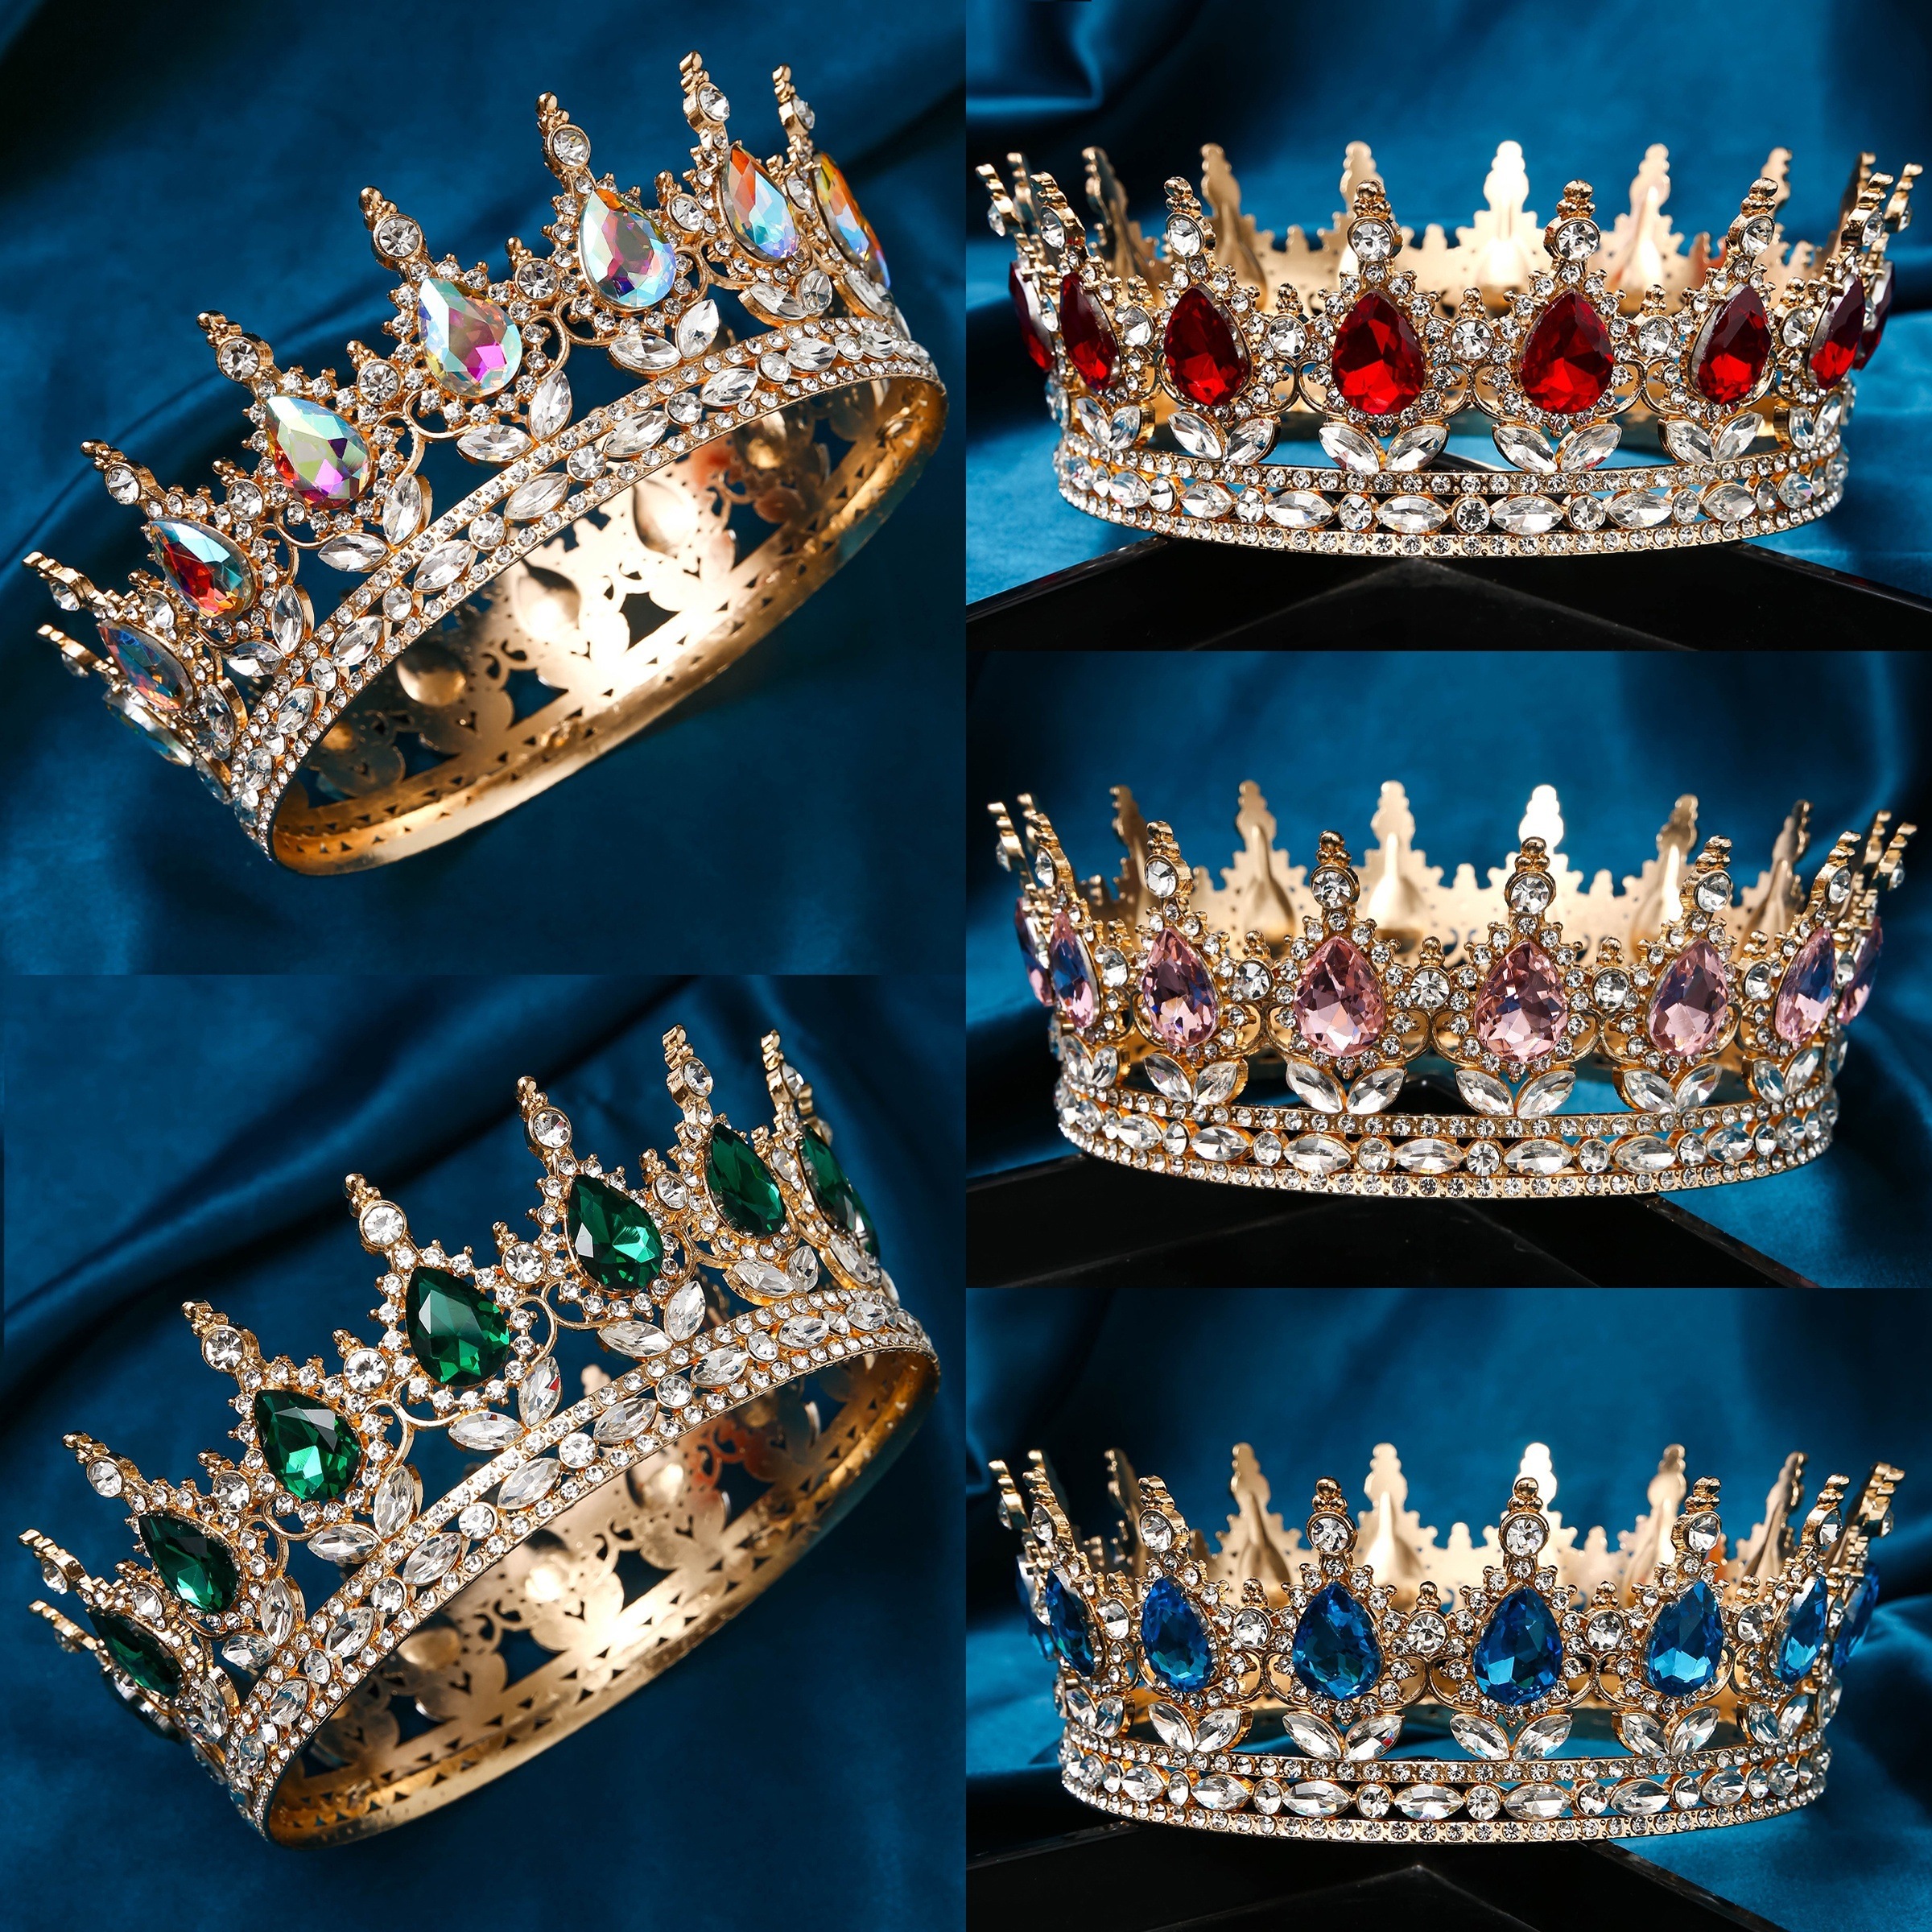 blue king crowns